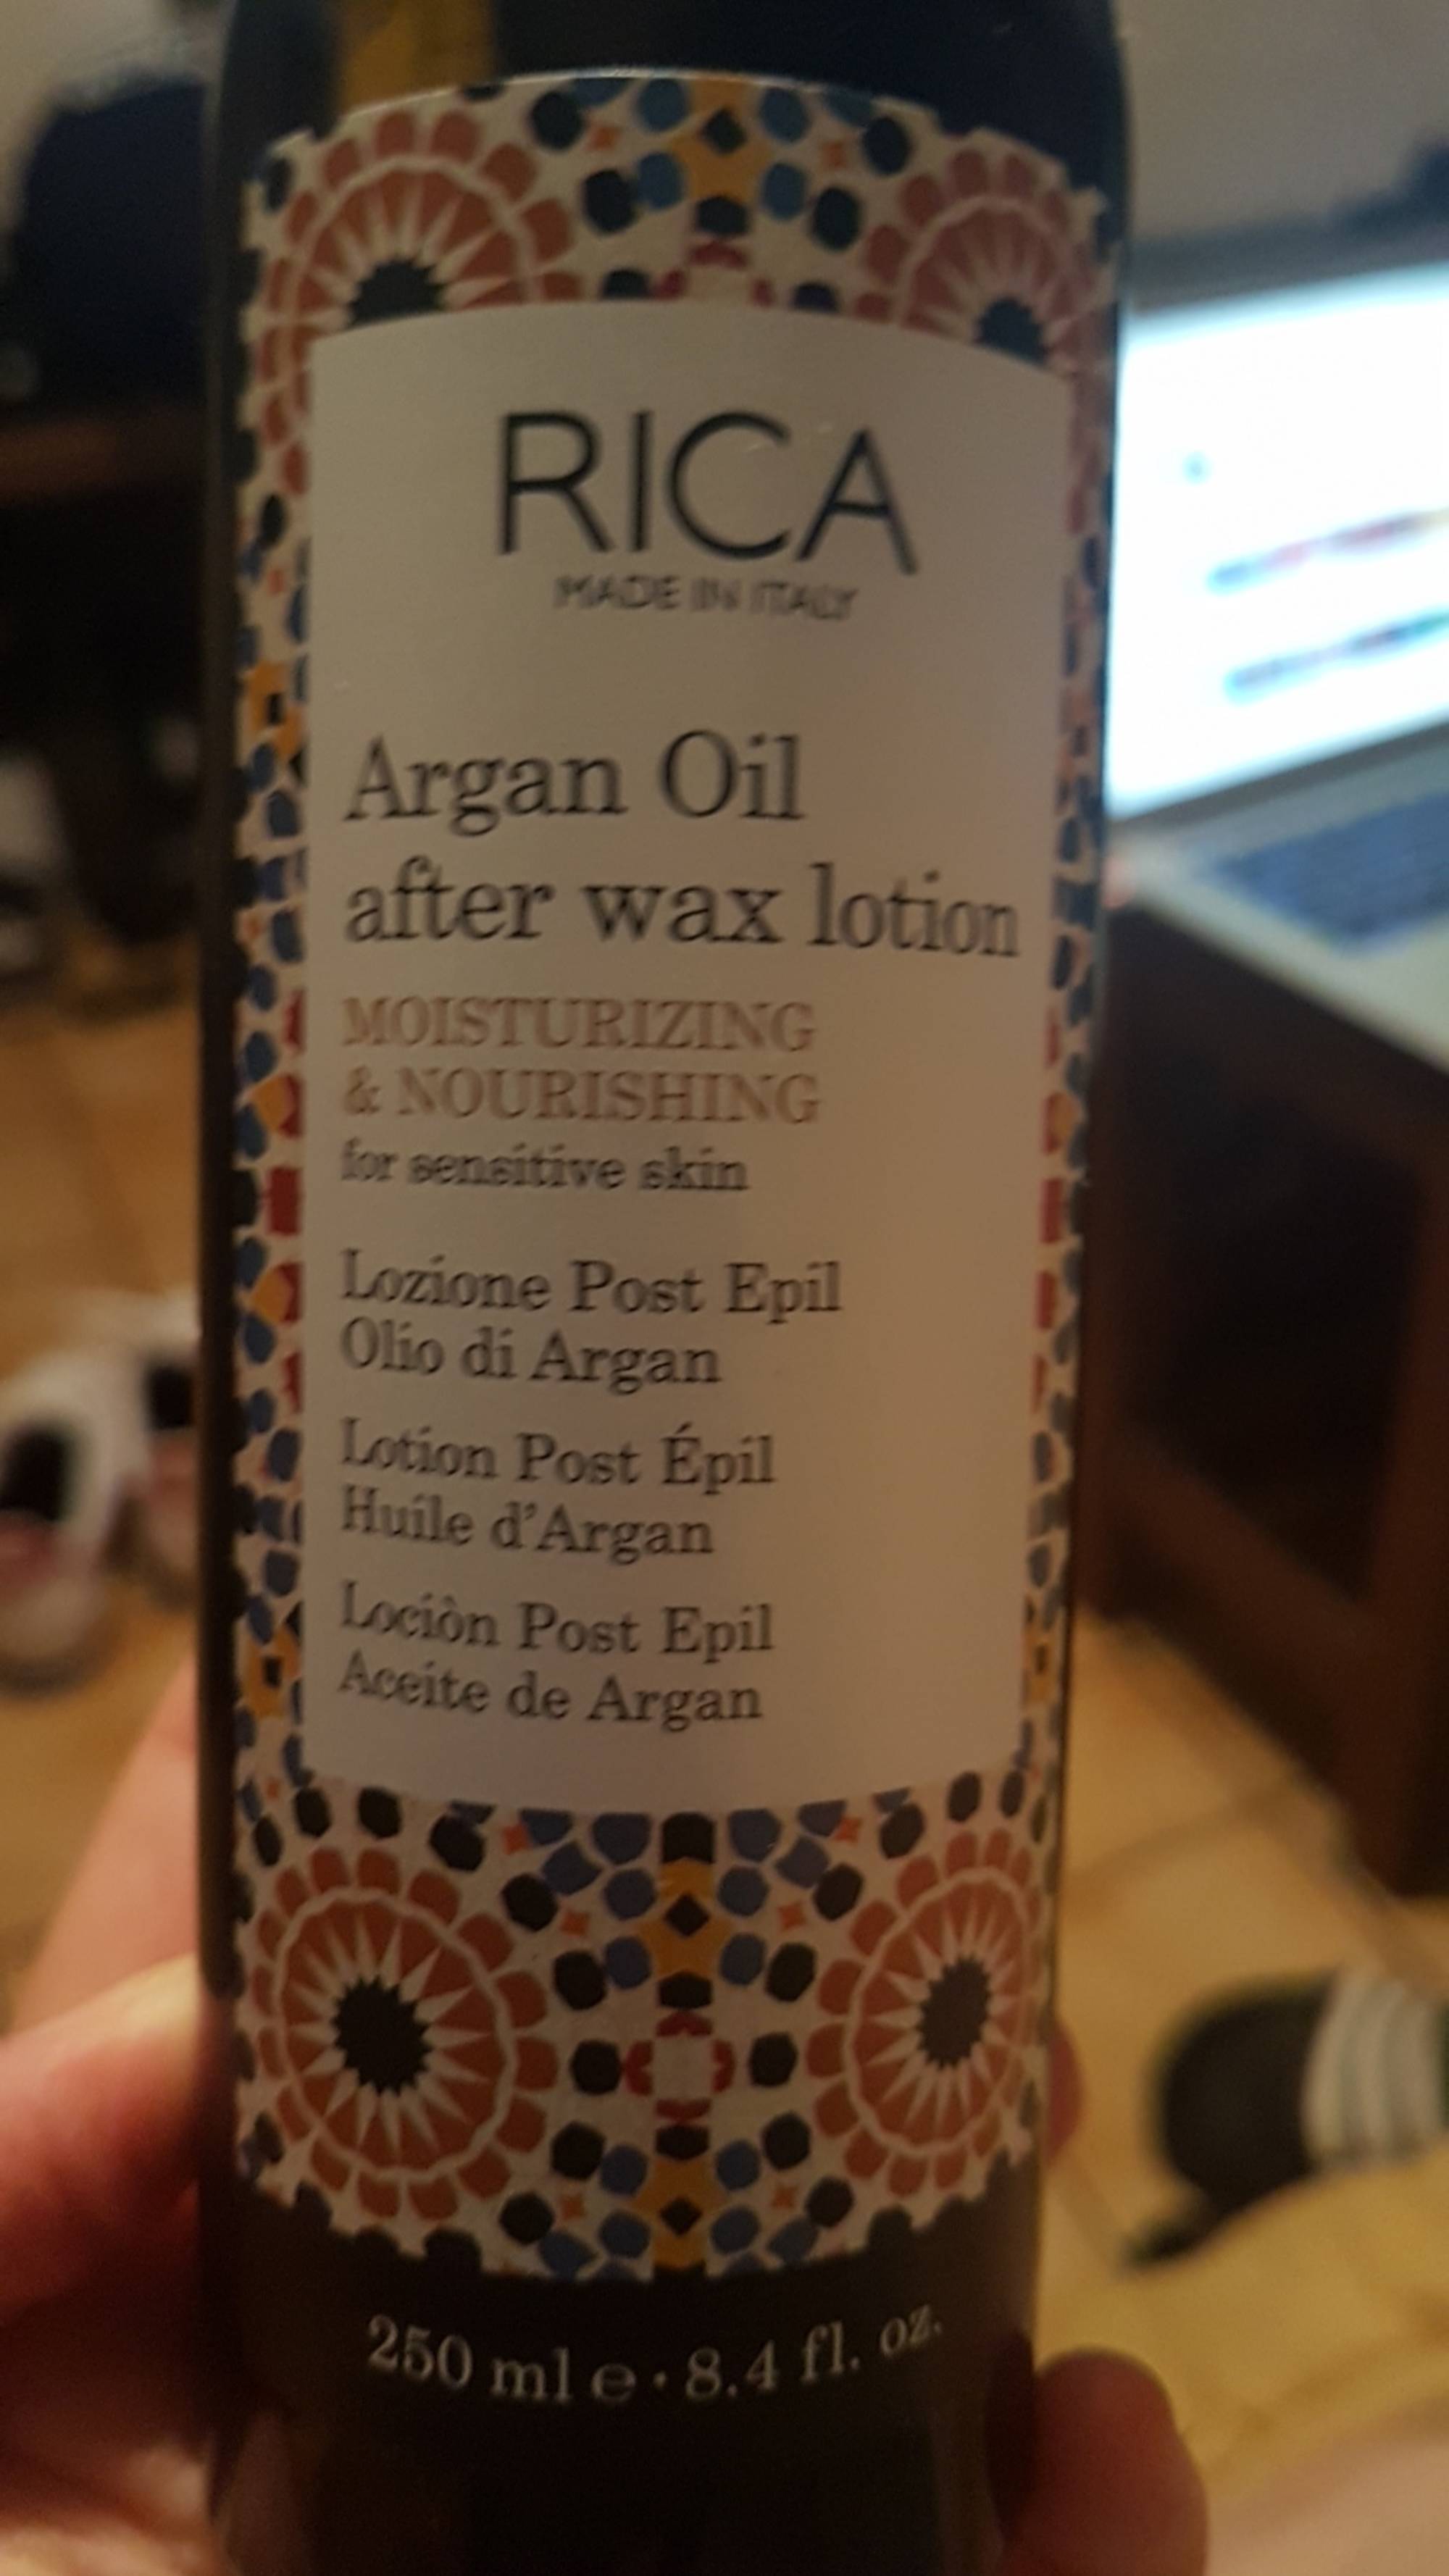 RICA - Argan oil - After wax lotion